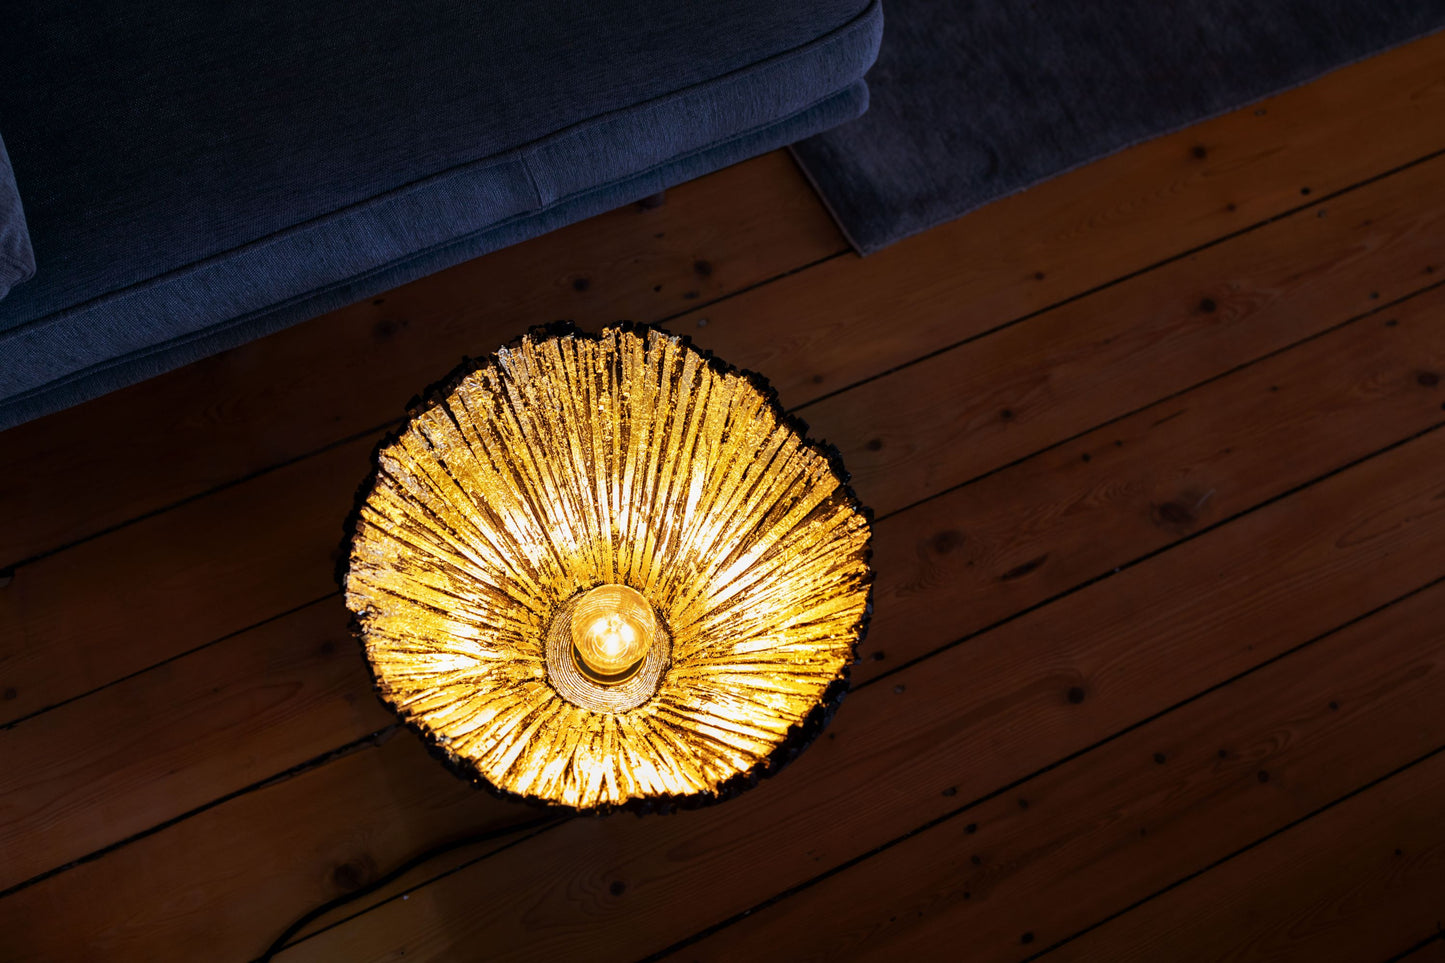 Pressed Wood Table lamp, in setting from above